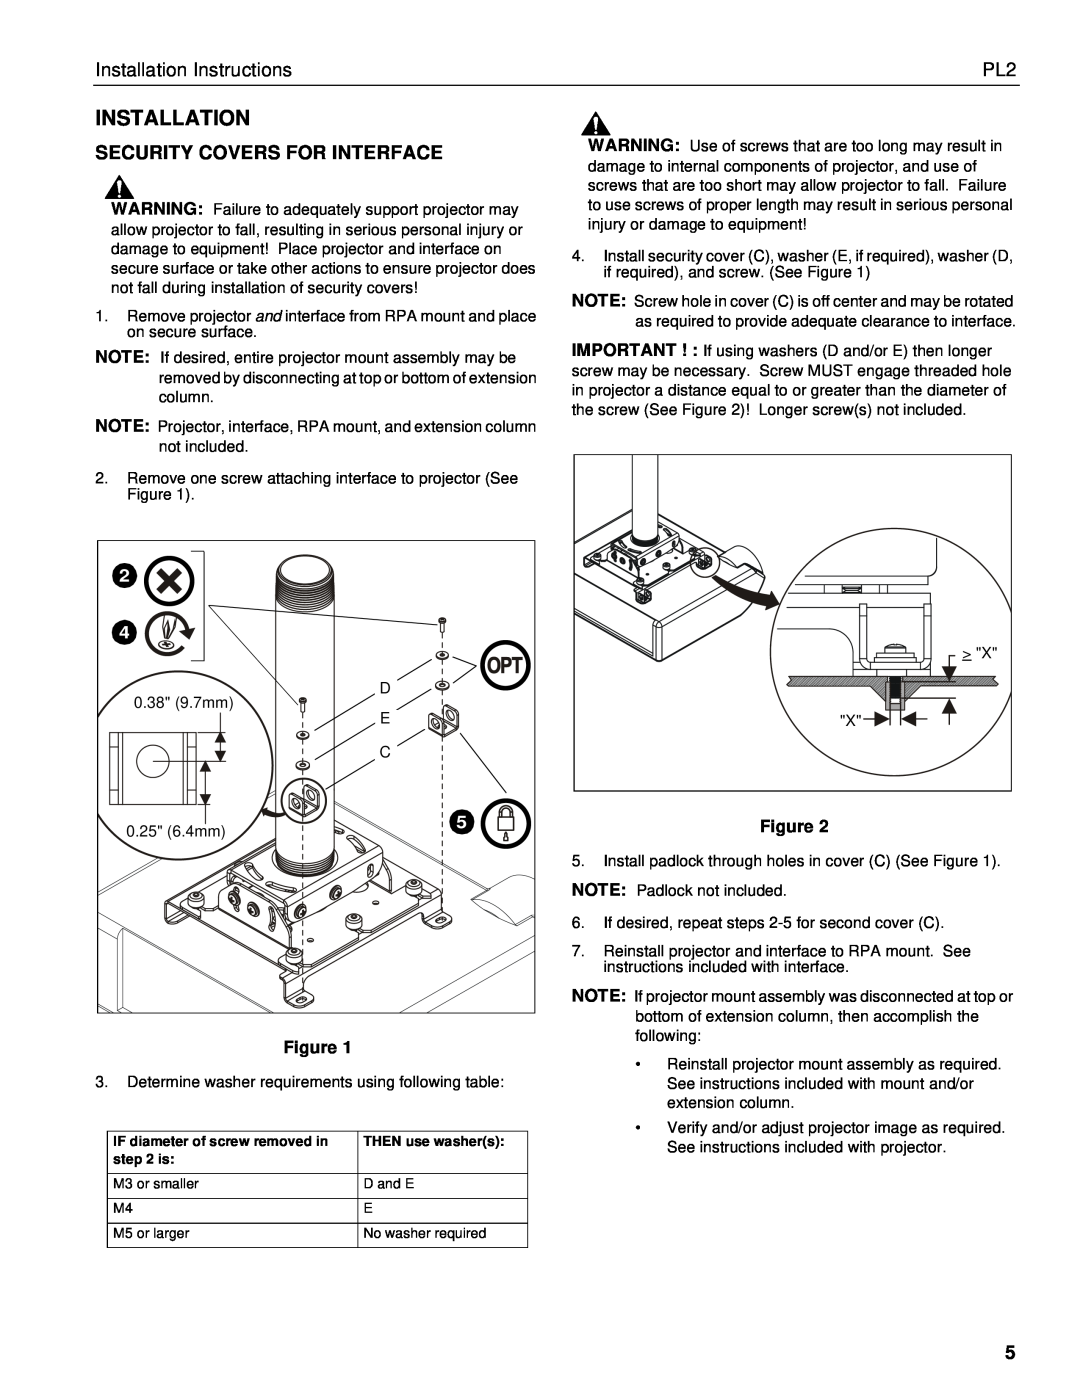 Chief Manufacturing PL2 installation instructions Security Covers For Interface, Installation Instructions 